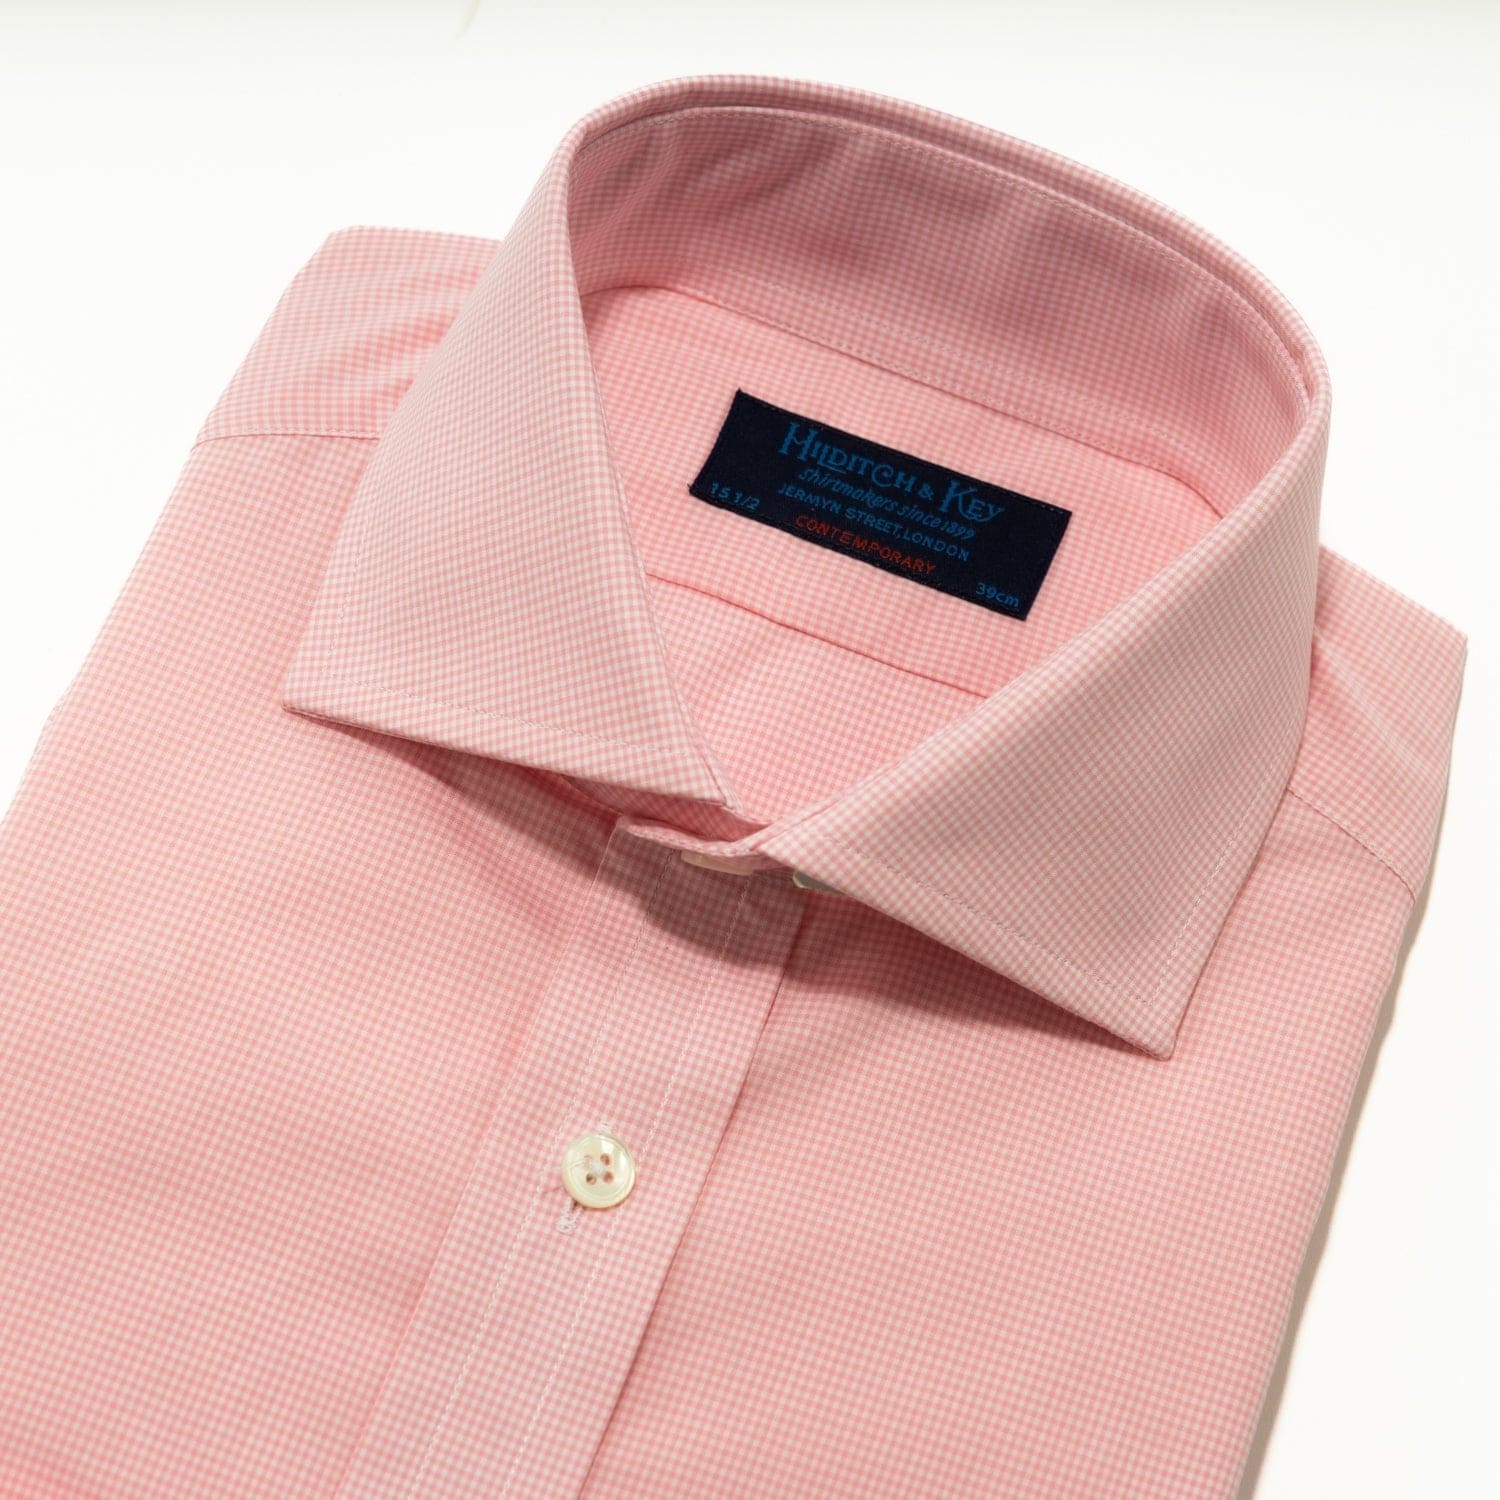 Contemporary Fit, Cutaway Collar, 2 Button Cuff Shirt in Pink Micro Check